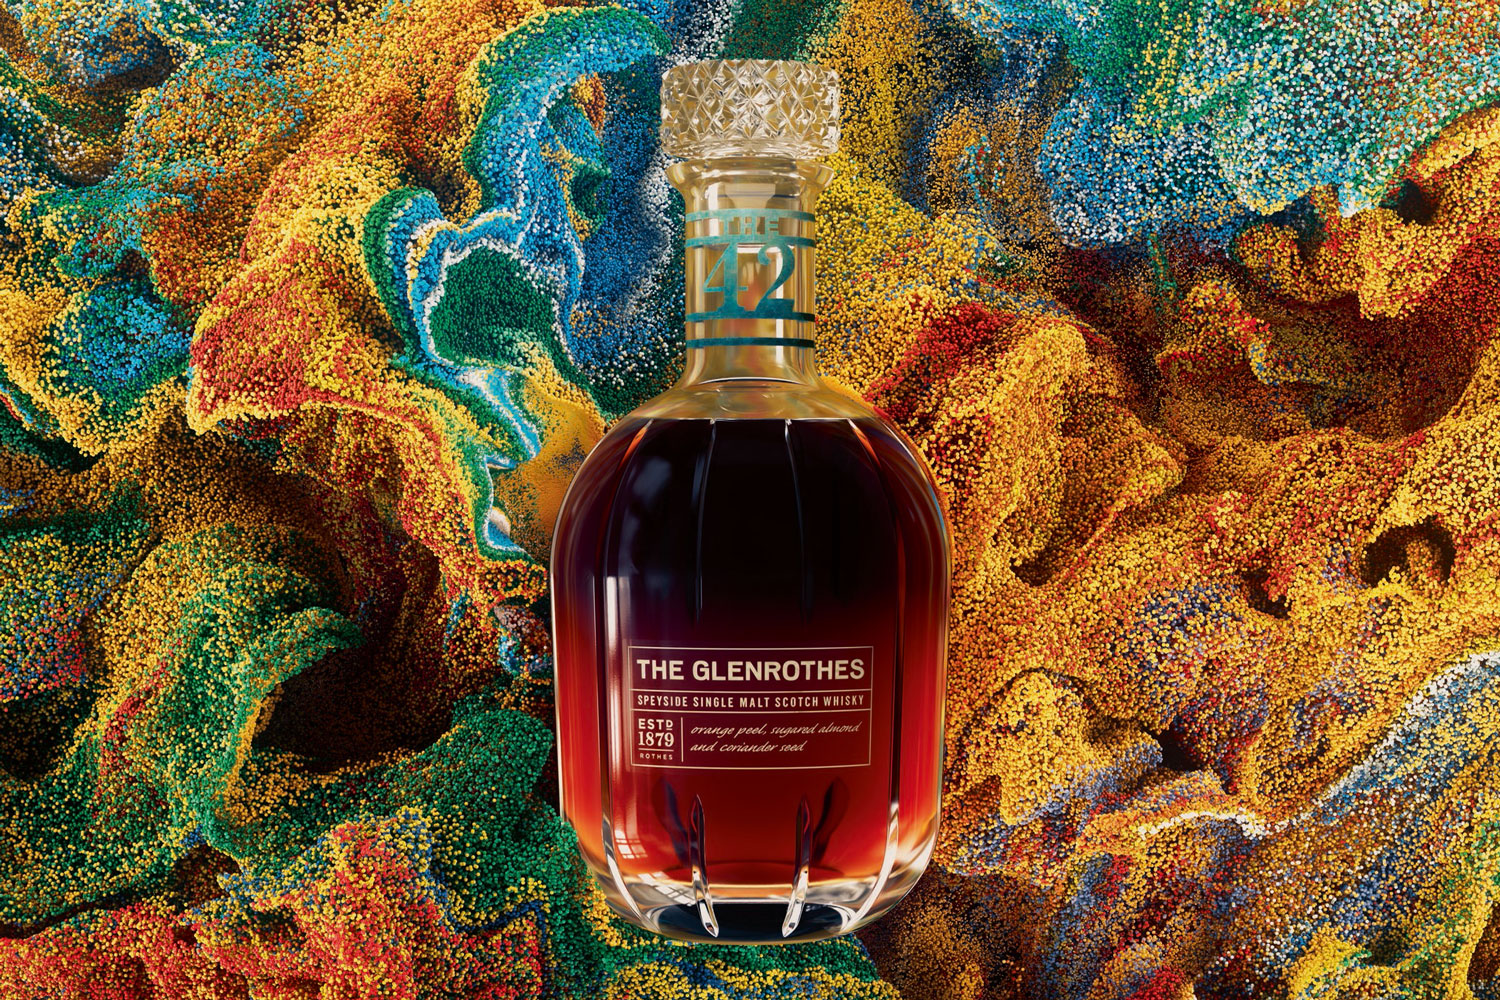 A bottle of The Glenrothes Speyside Single Malt Scotch Whiskey on a colorful background